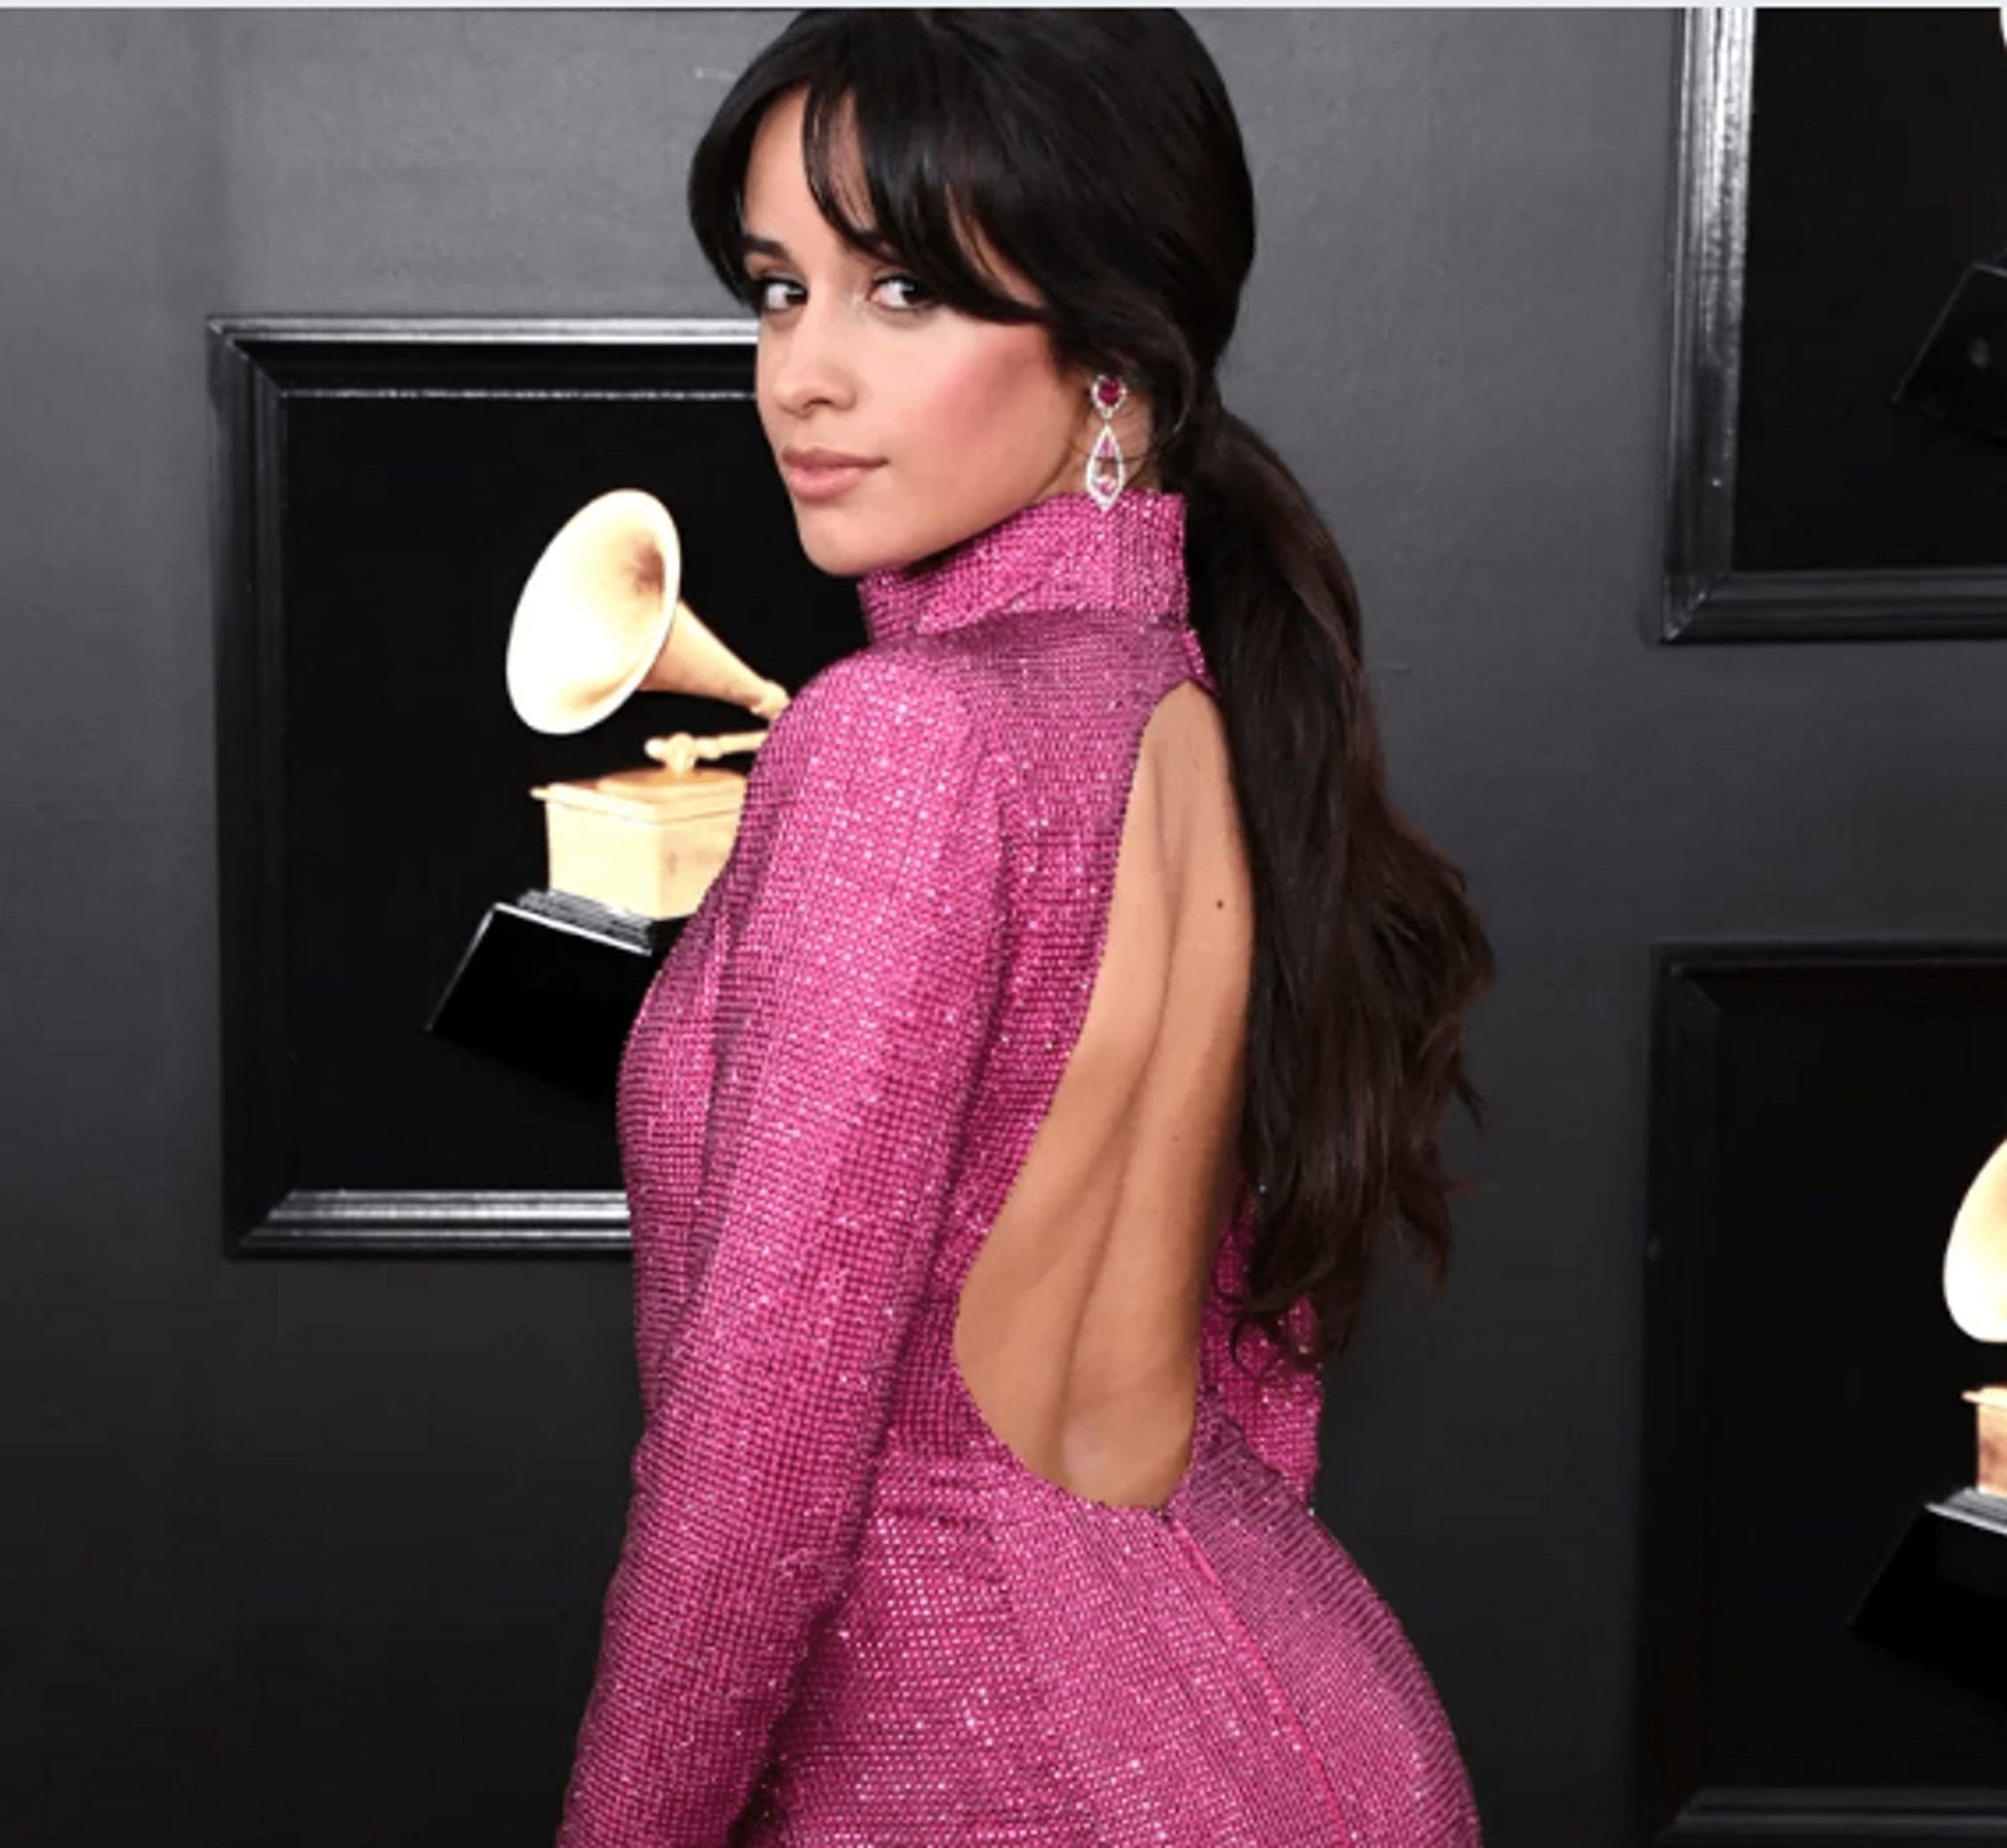 Football fans tried to drown out Camila Cabello's performance